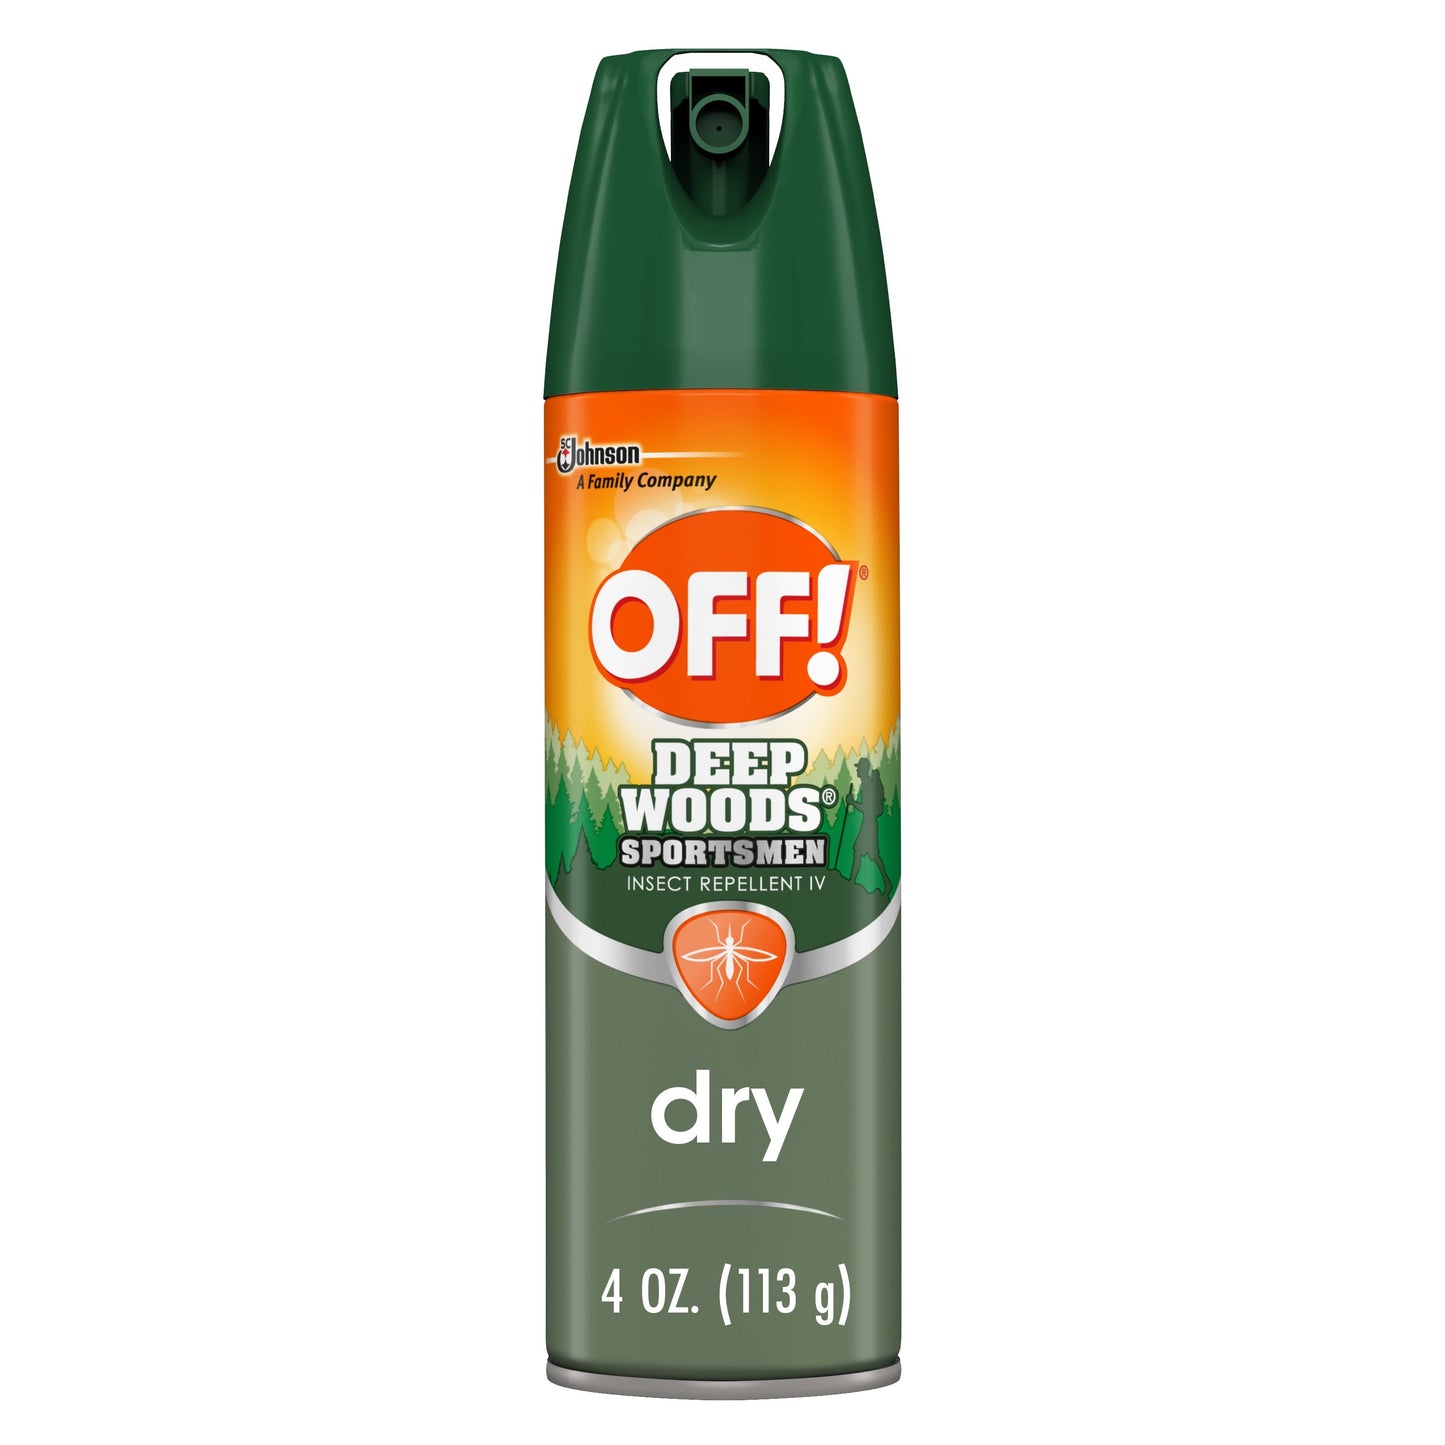 OFF! Sportsmen Deep Woods Dry Insect Repellent IV, Non-Greasy Mosquito Spray, 4 oz